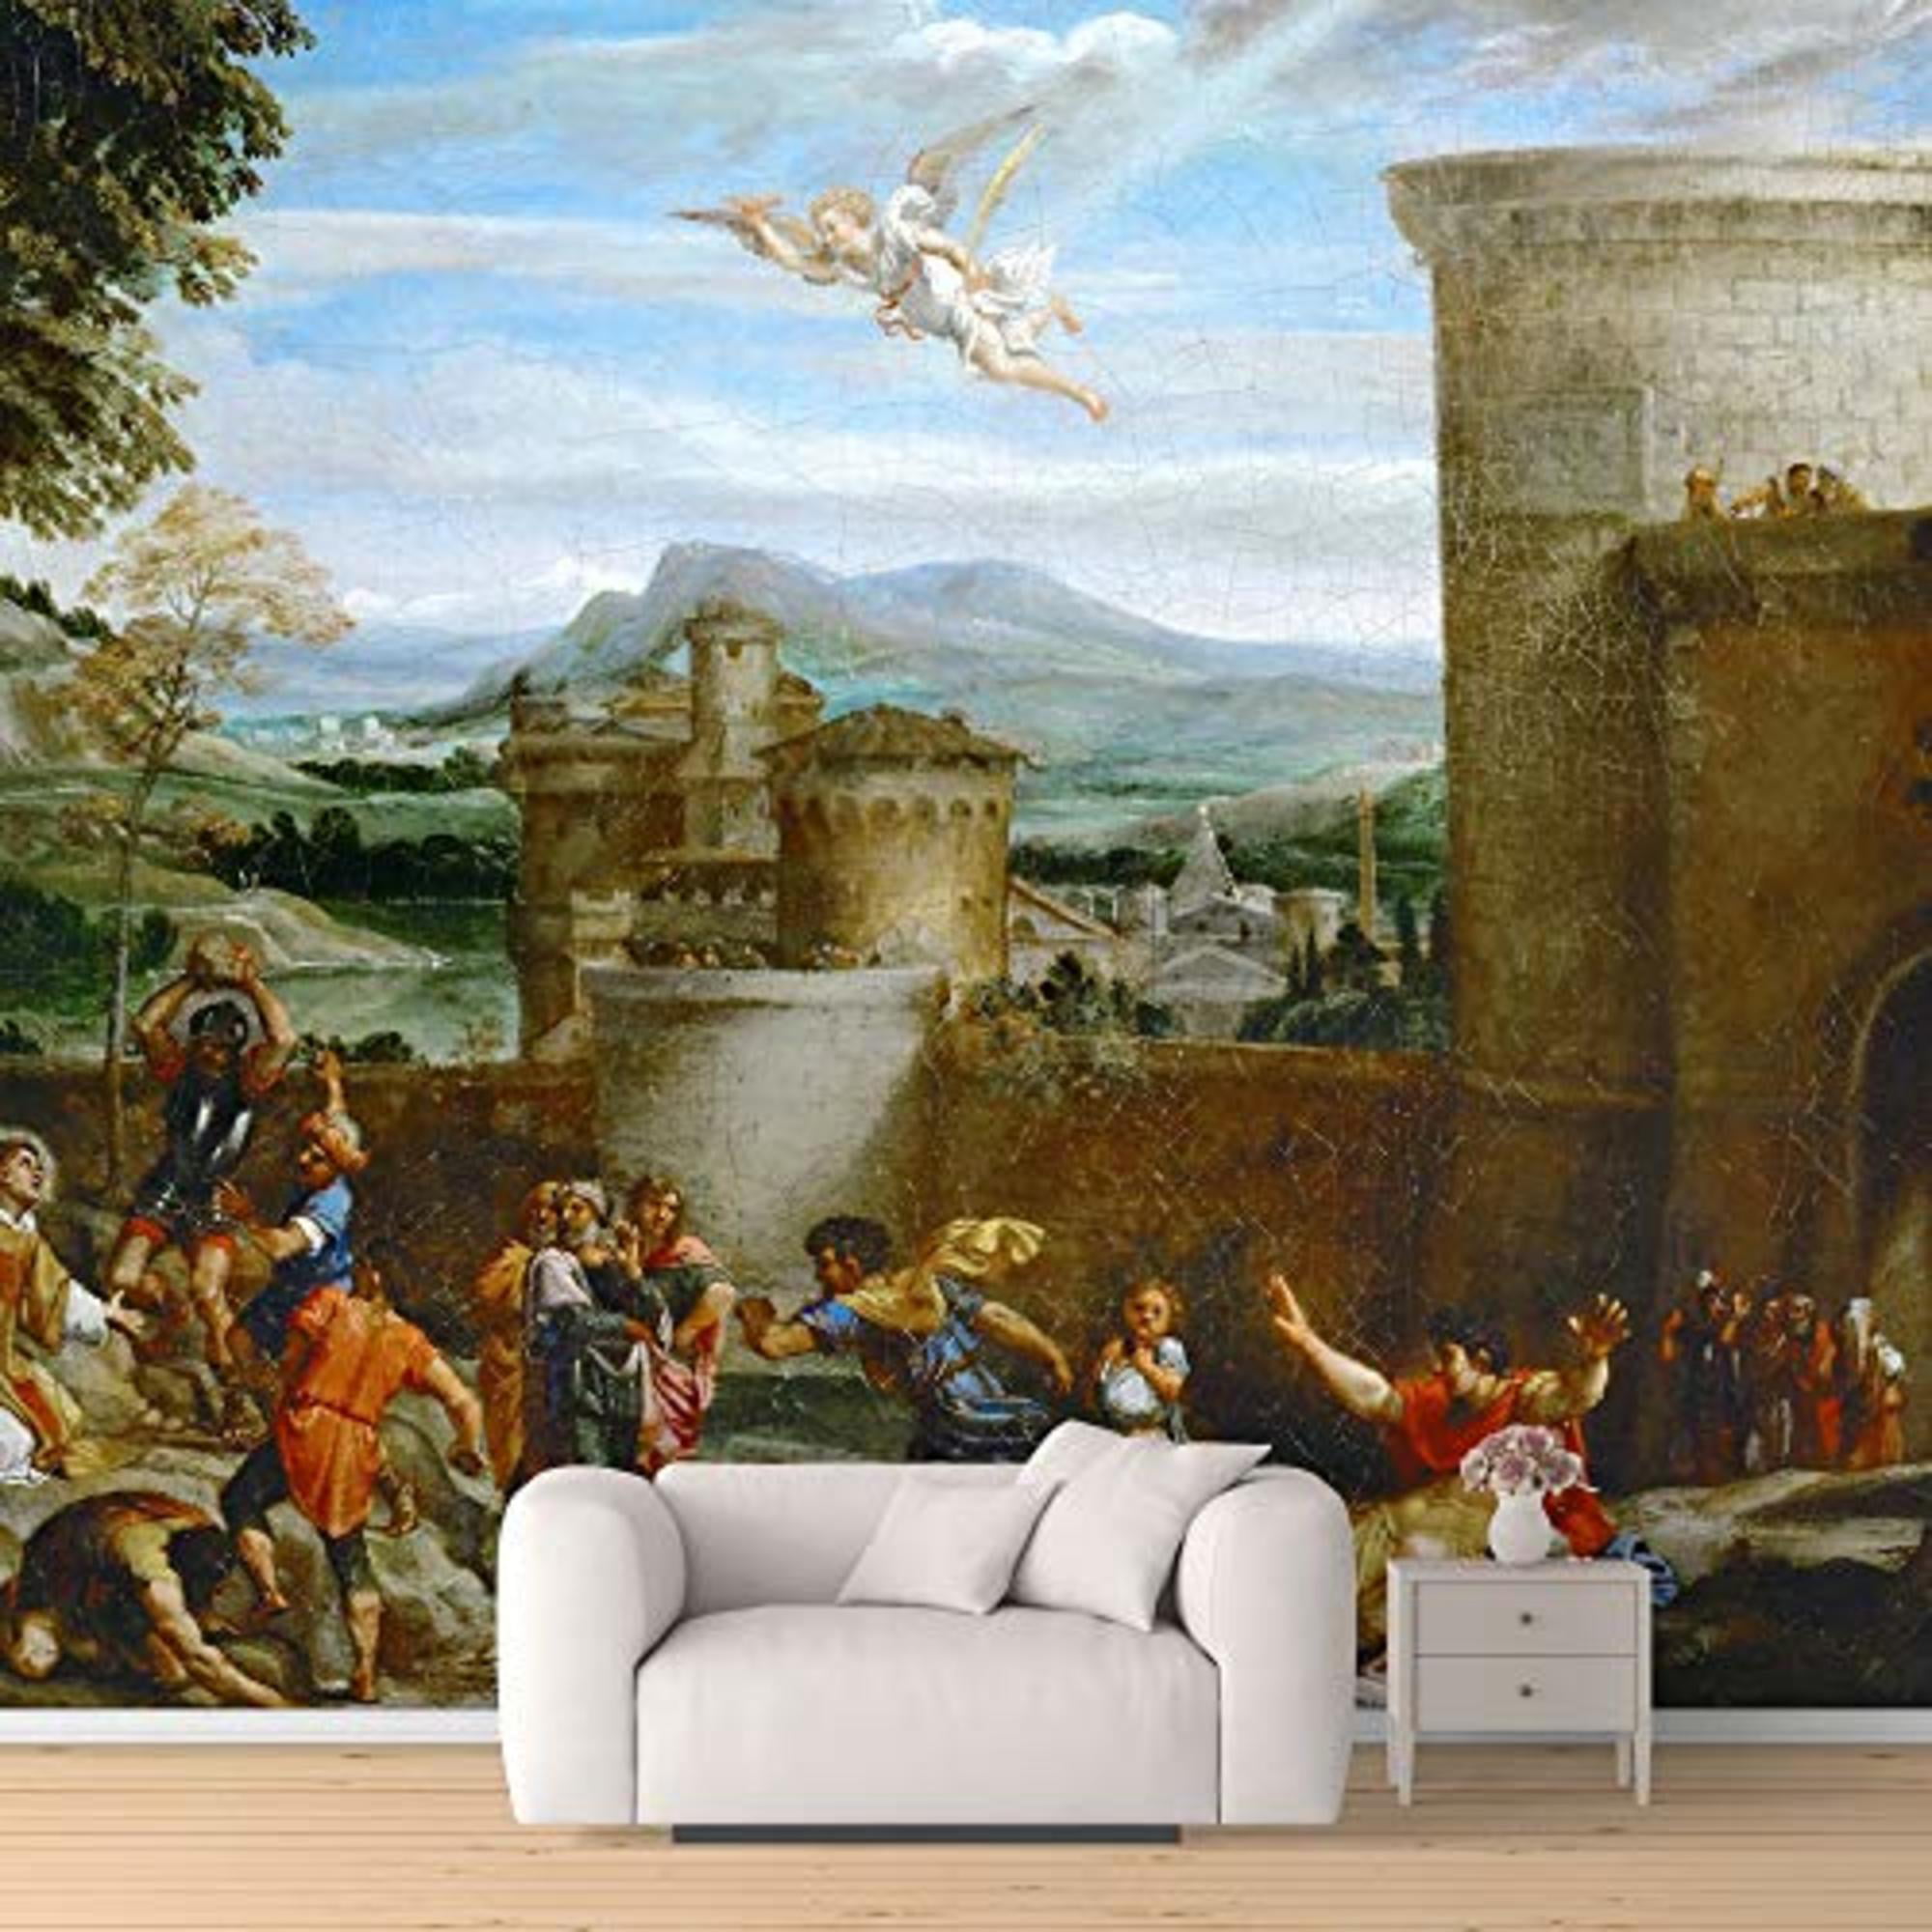 Idea4wall 6pcs Famous Art Painting Peel and Stick Wallpaper Removable Wall  Murals Large Wall Stickers for Home Decoration, 100